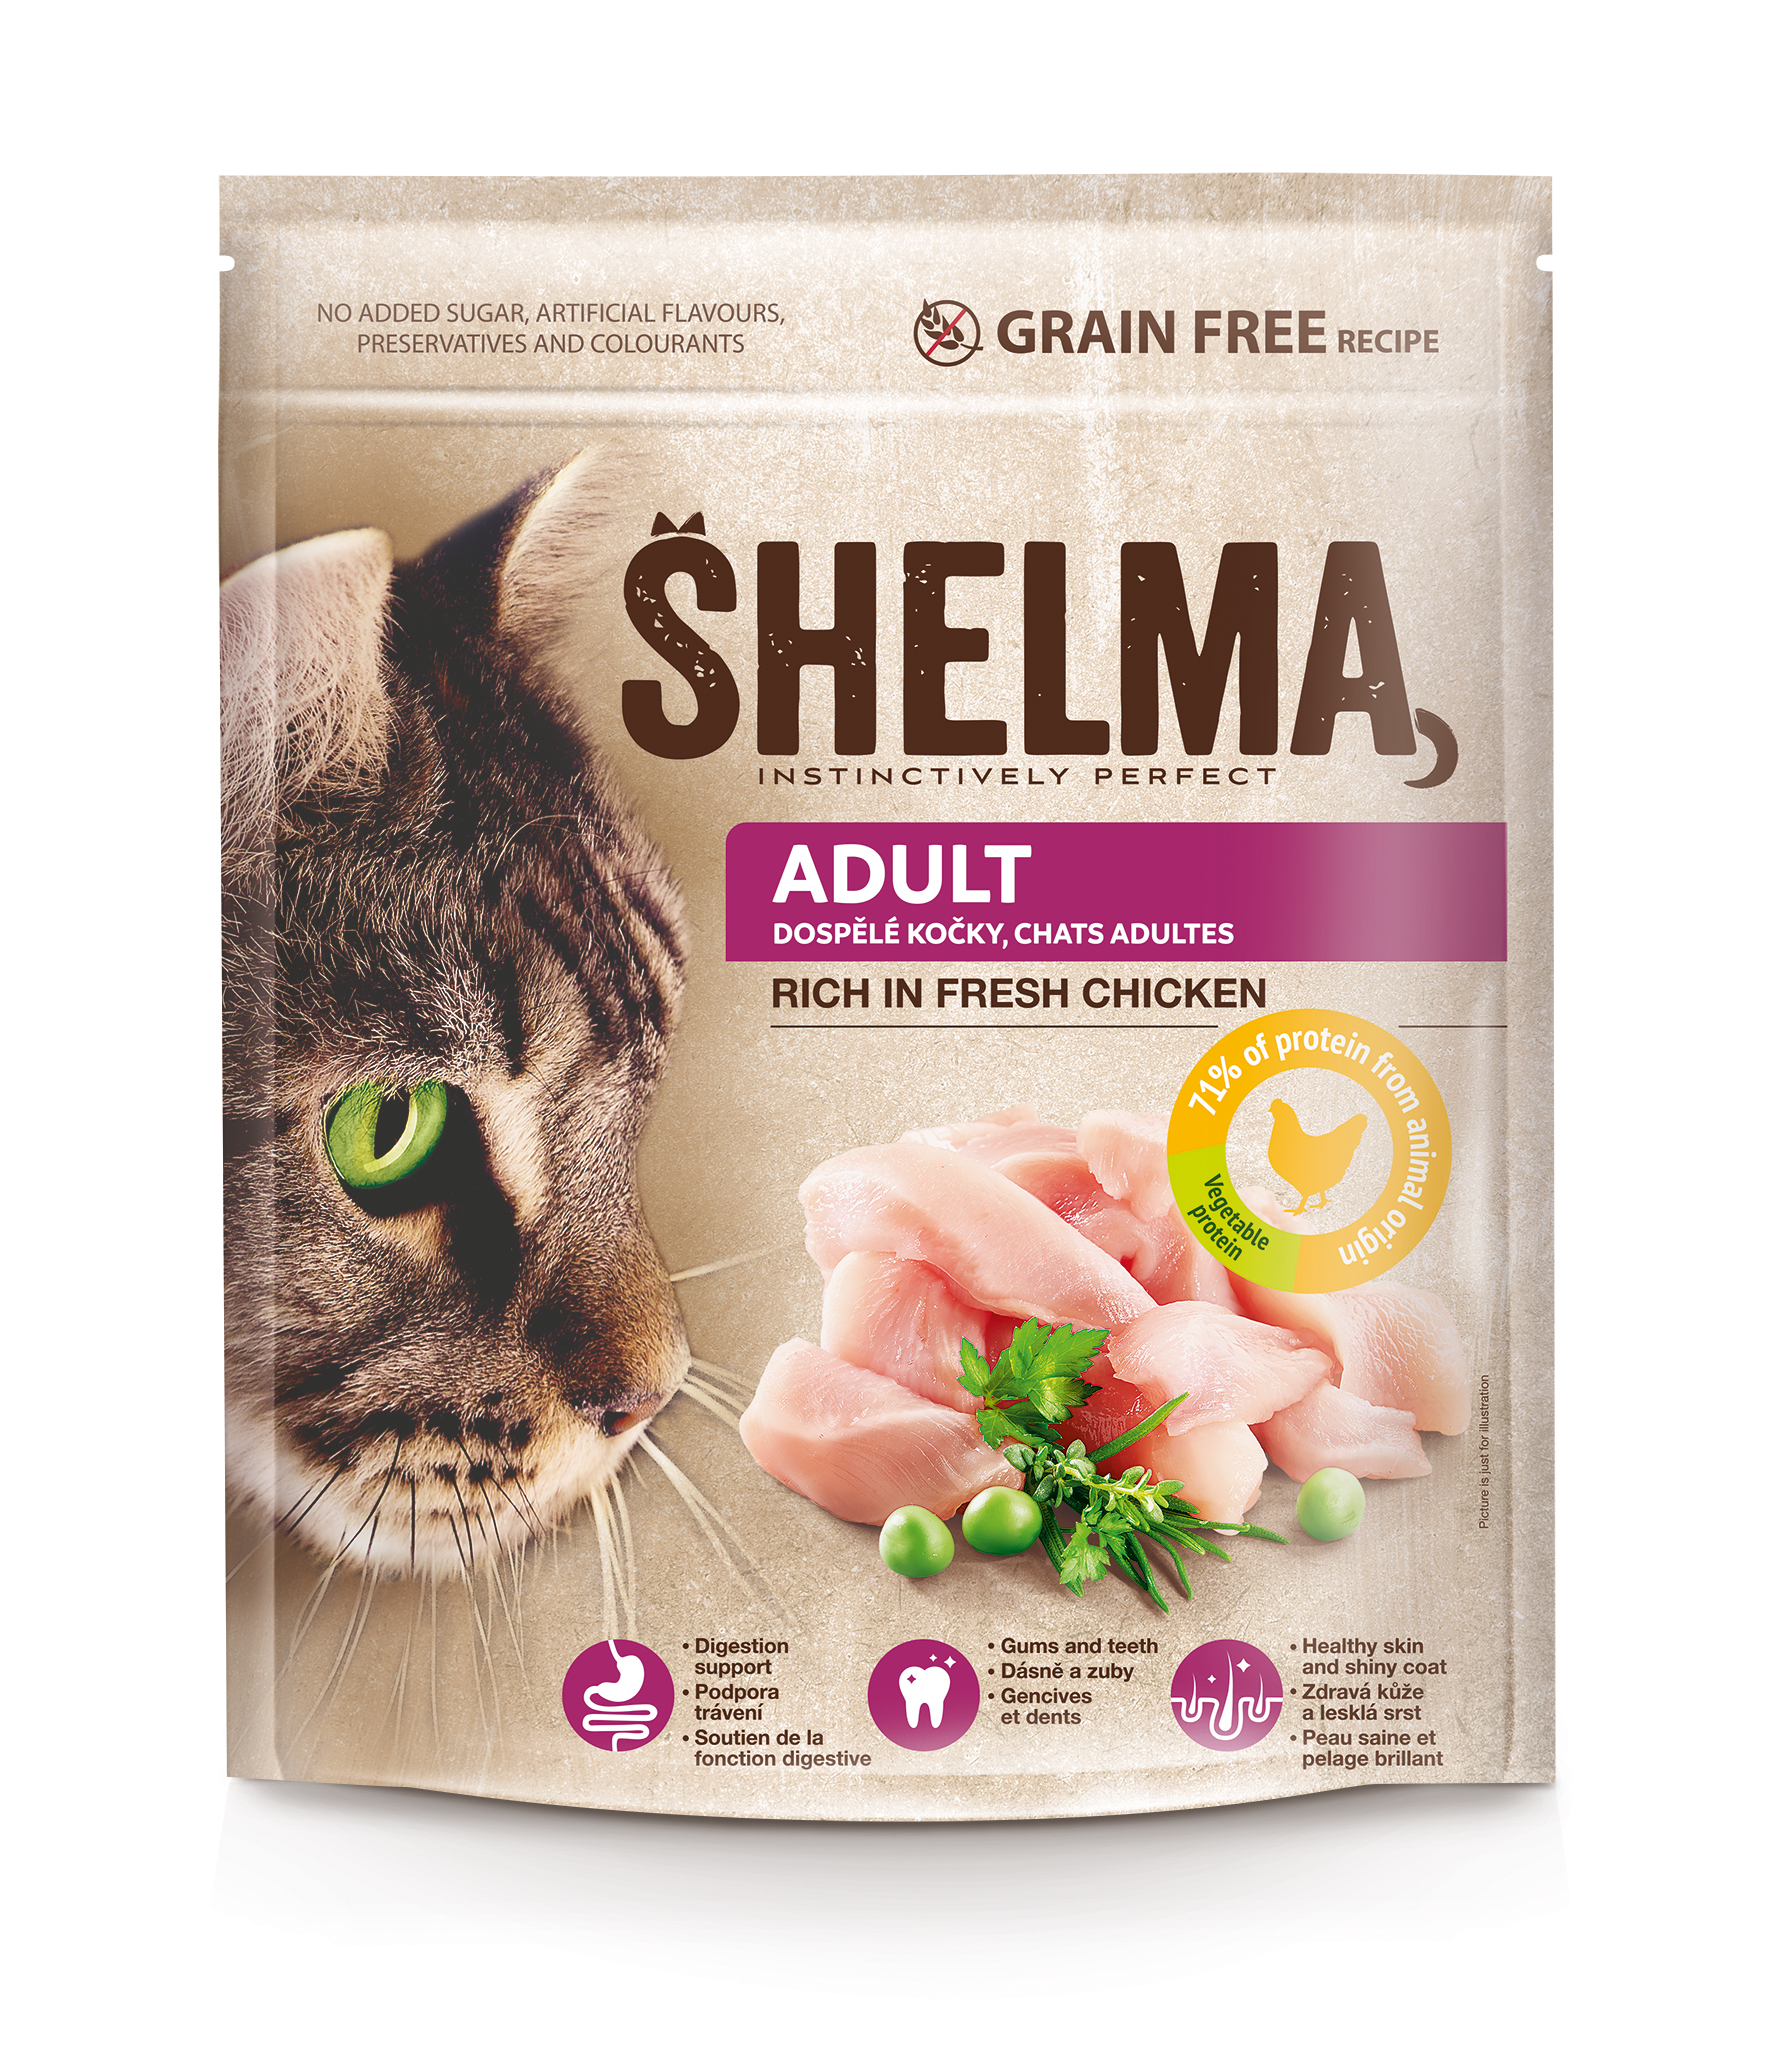 Shelma Grain Free, For adult cats rich in fresh chicken 750g